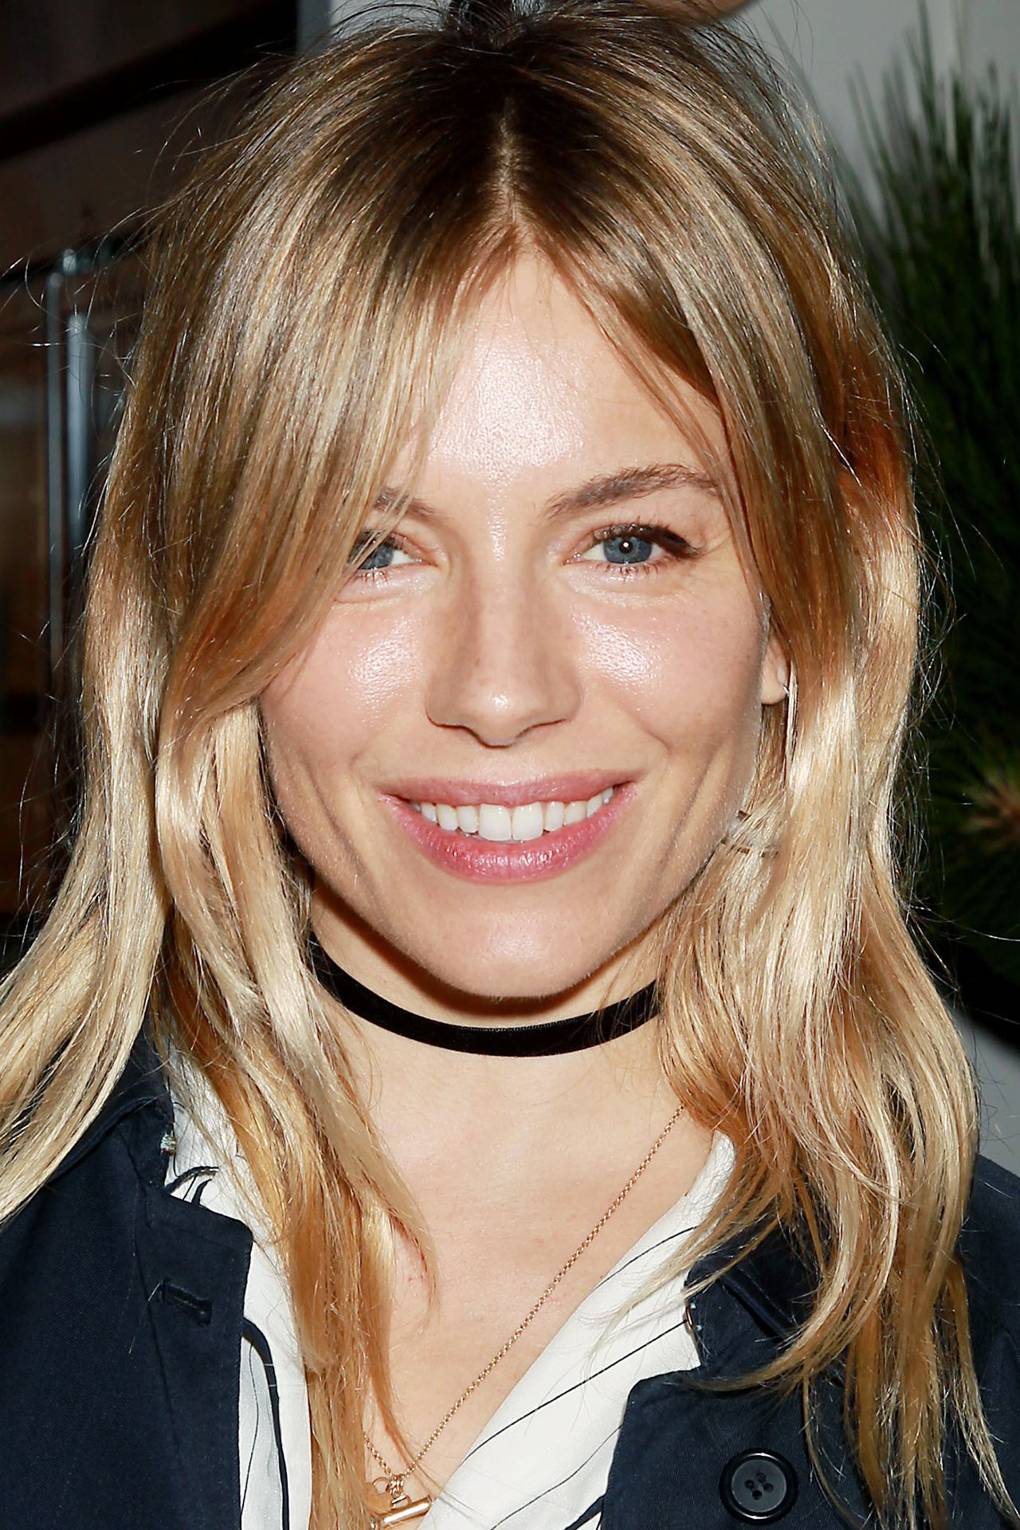 sienna miller's best hair and beauty looks through the years